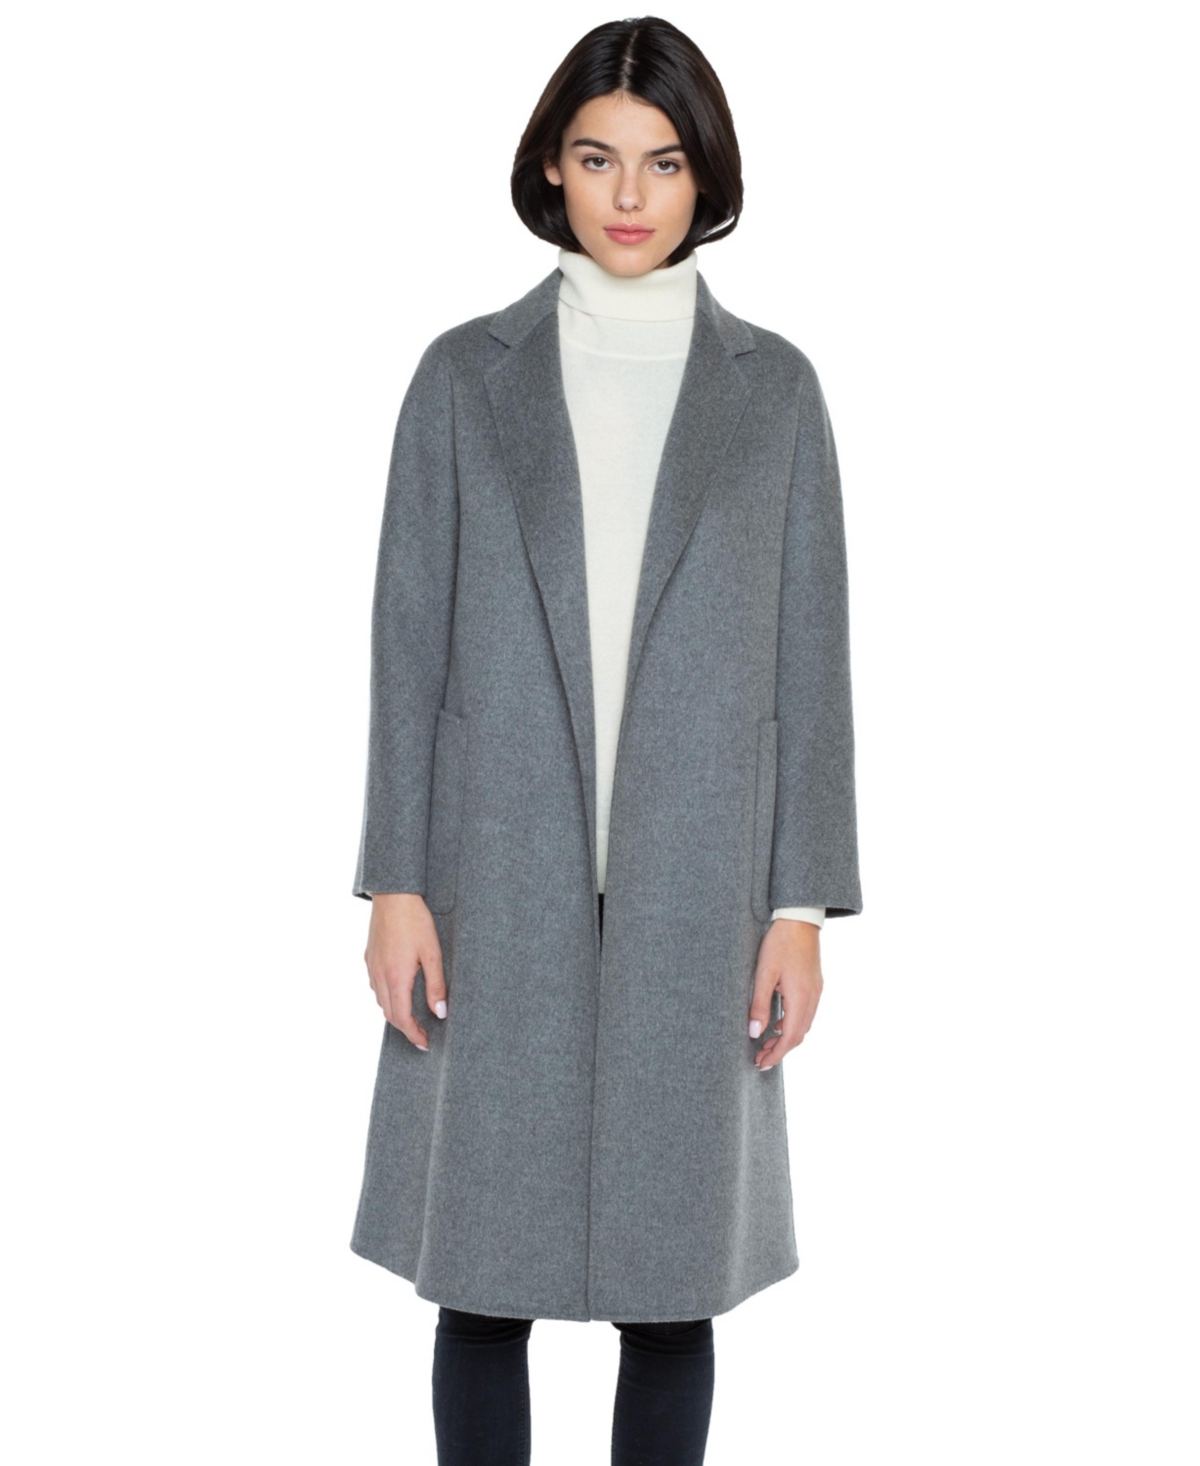 Women's Cashmere Wool Double Face Overcoat with Belt - Charcoal